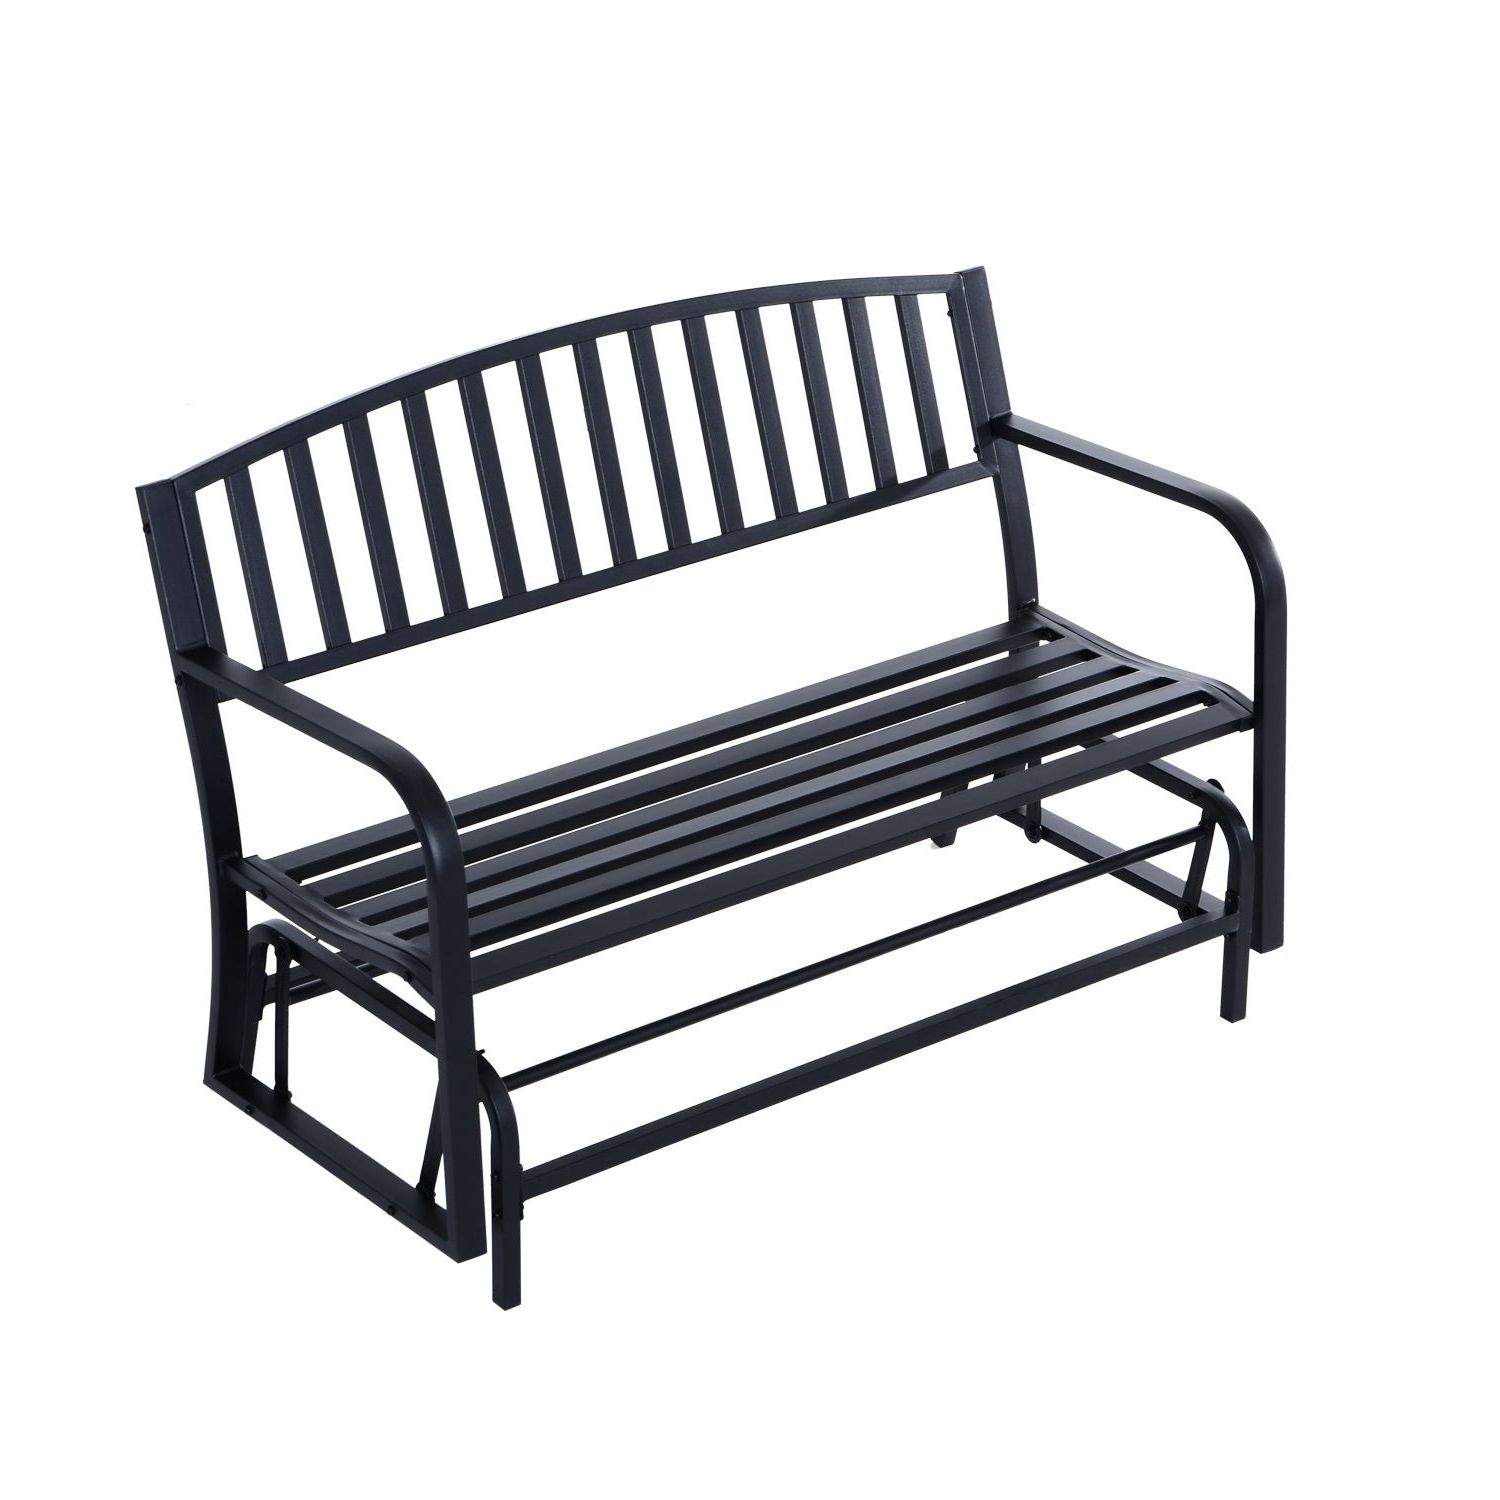 Outsunny 50 Inch Outdoor Steel Patio Swing Glider Bench – Black Within Widely Used 1 Person Antique Black Steel Outdoor Gliders (View 4 of 25)